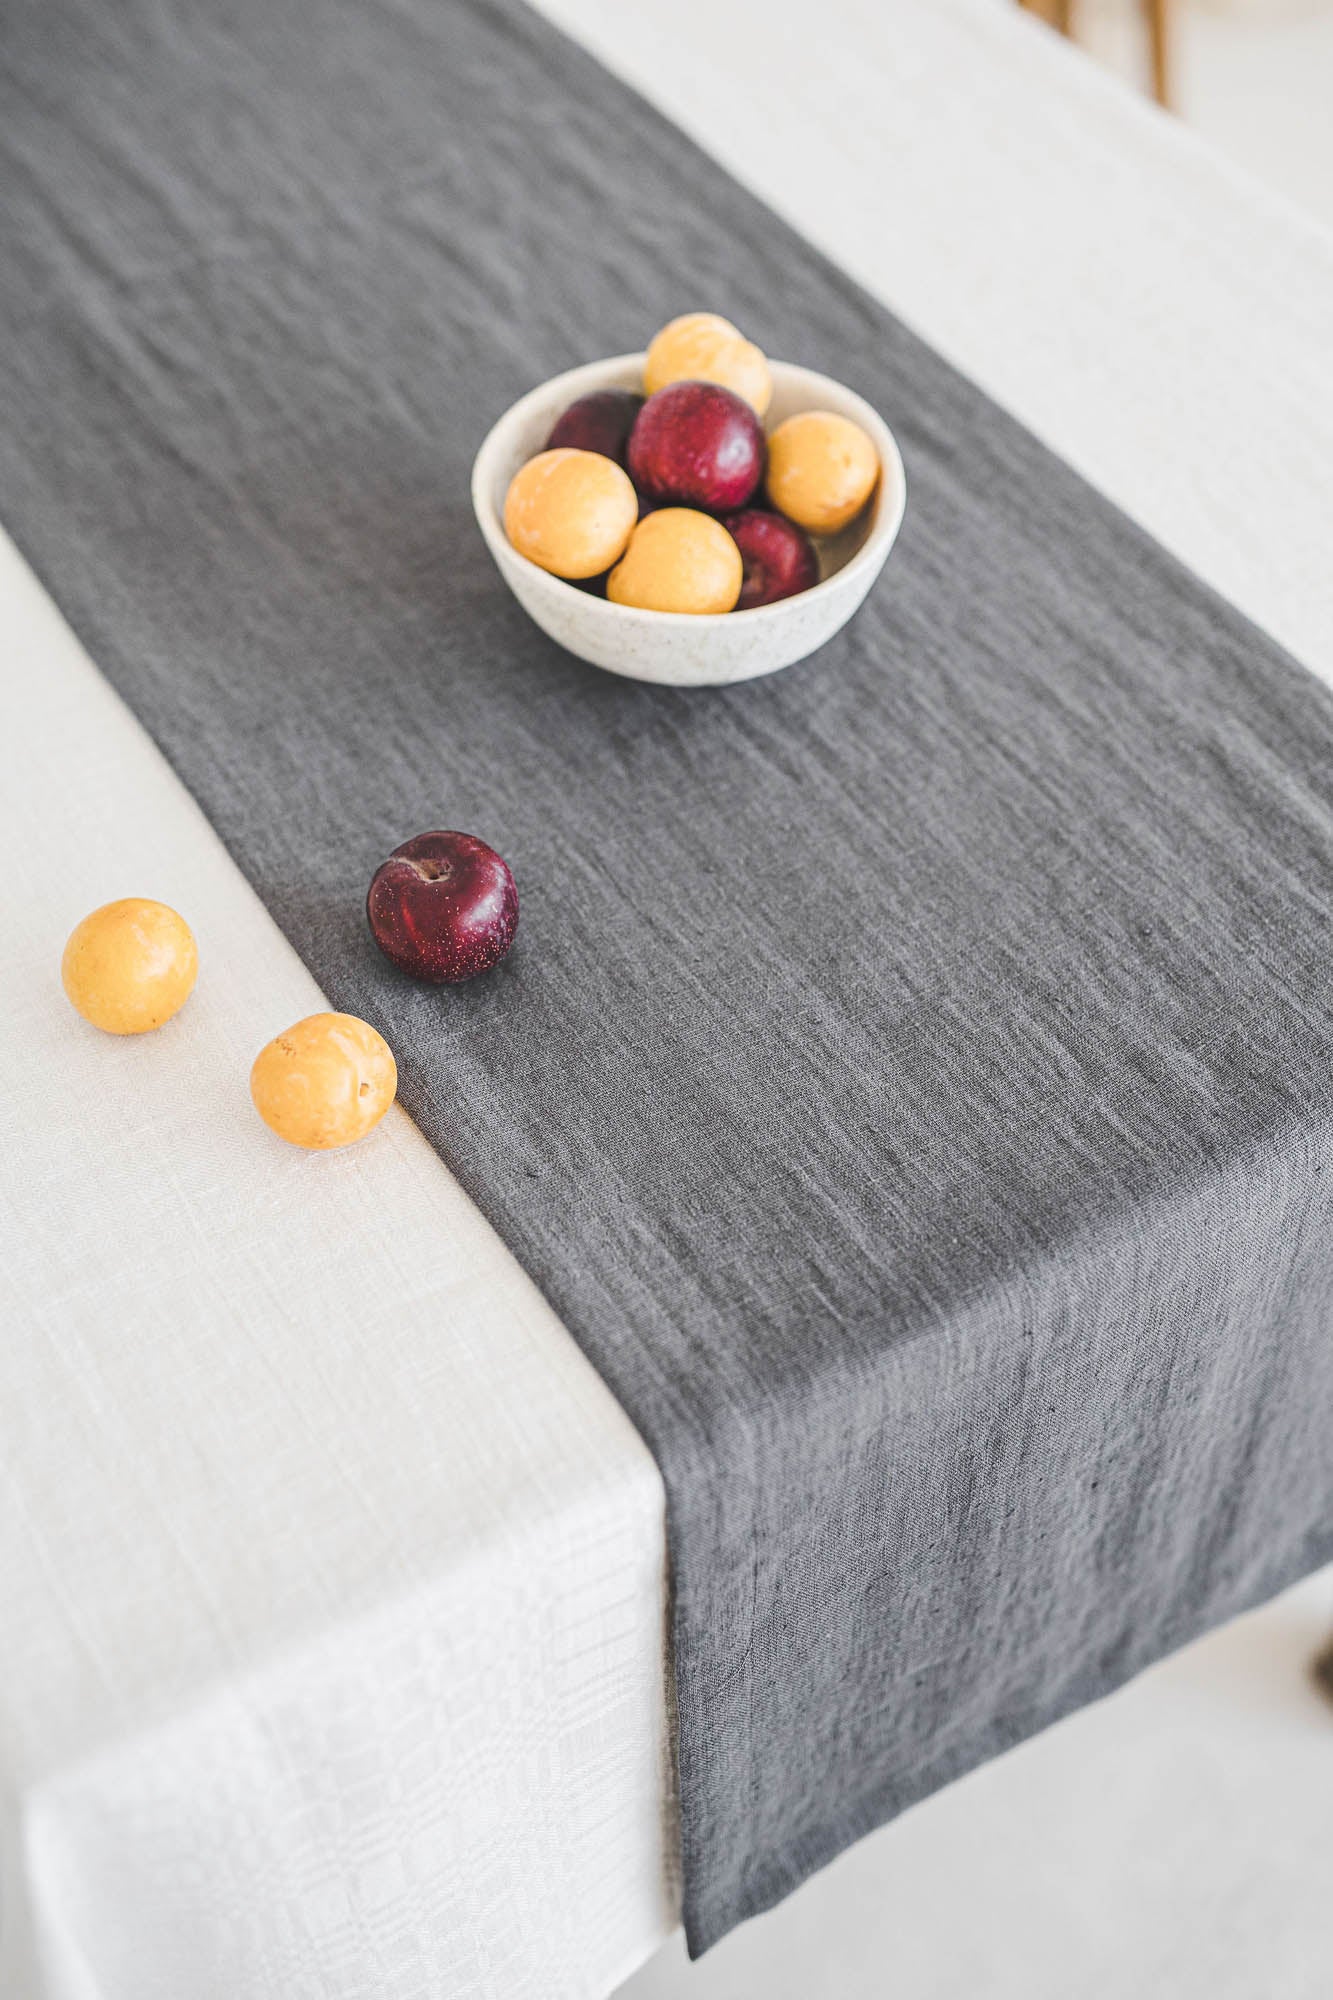 Charcoal gray linen table runner with mitered corners